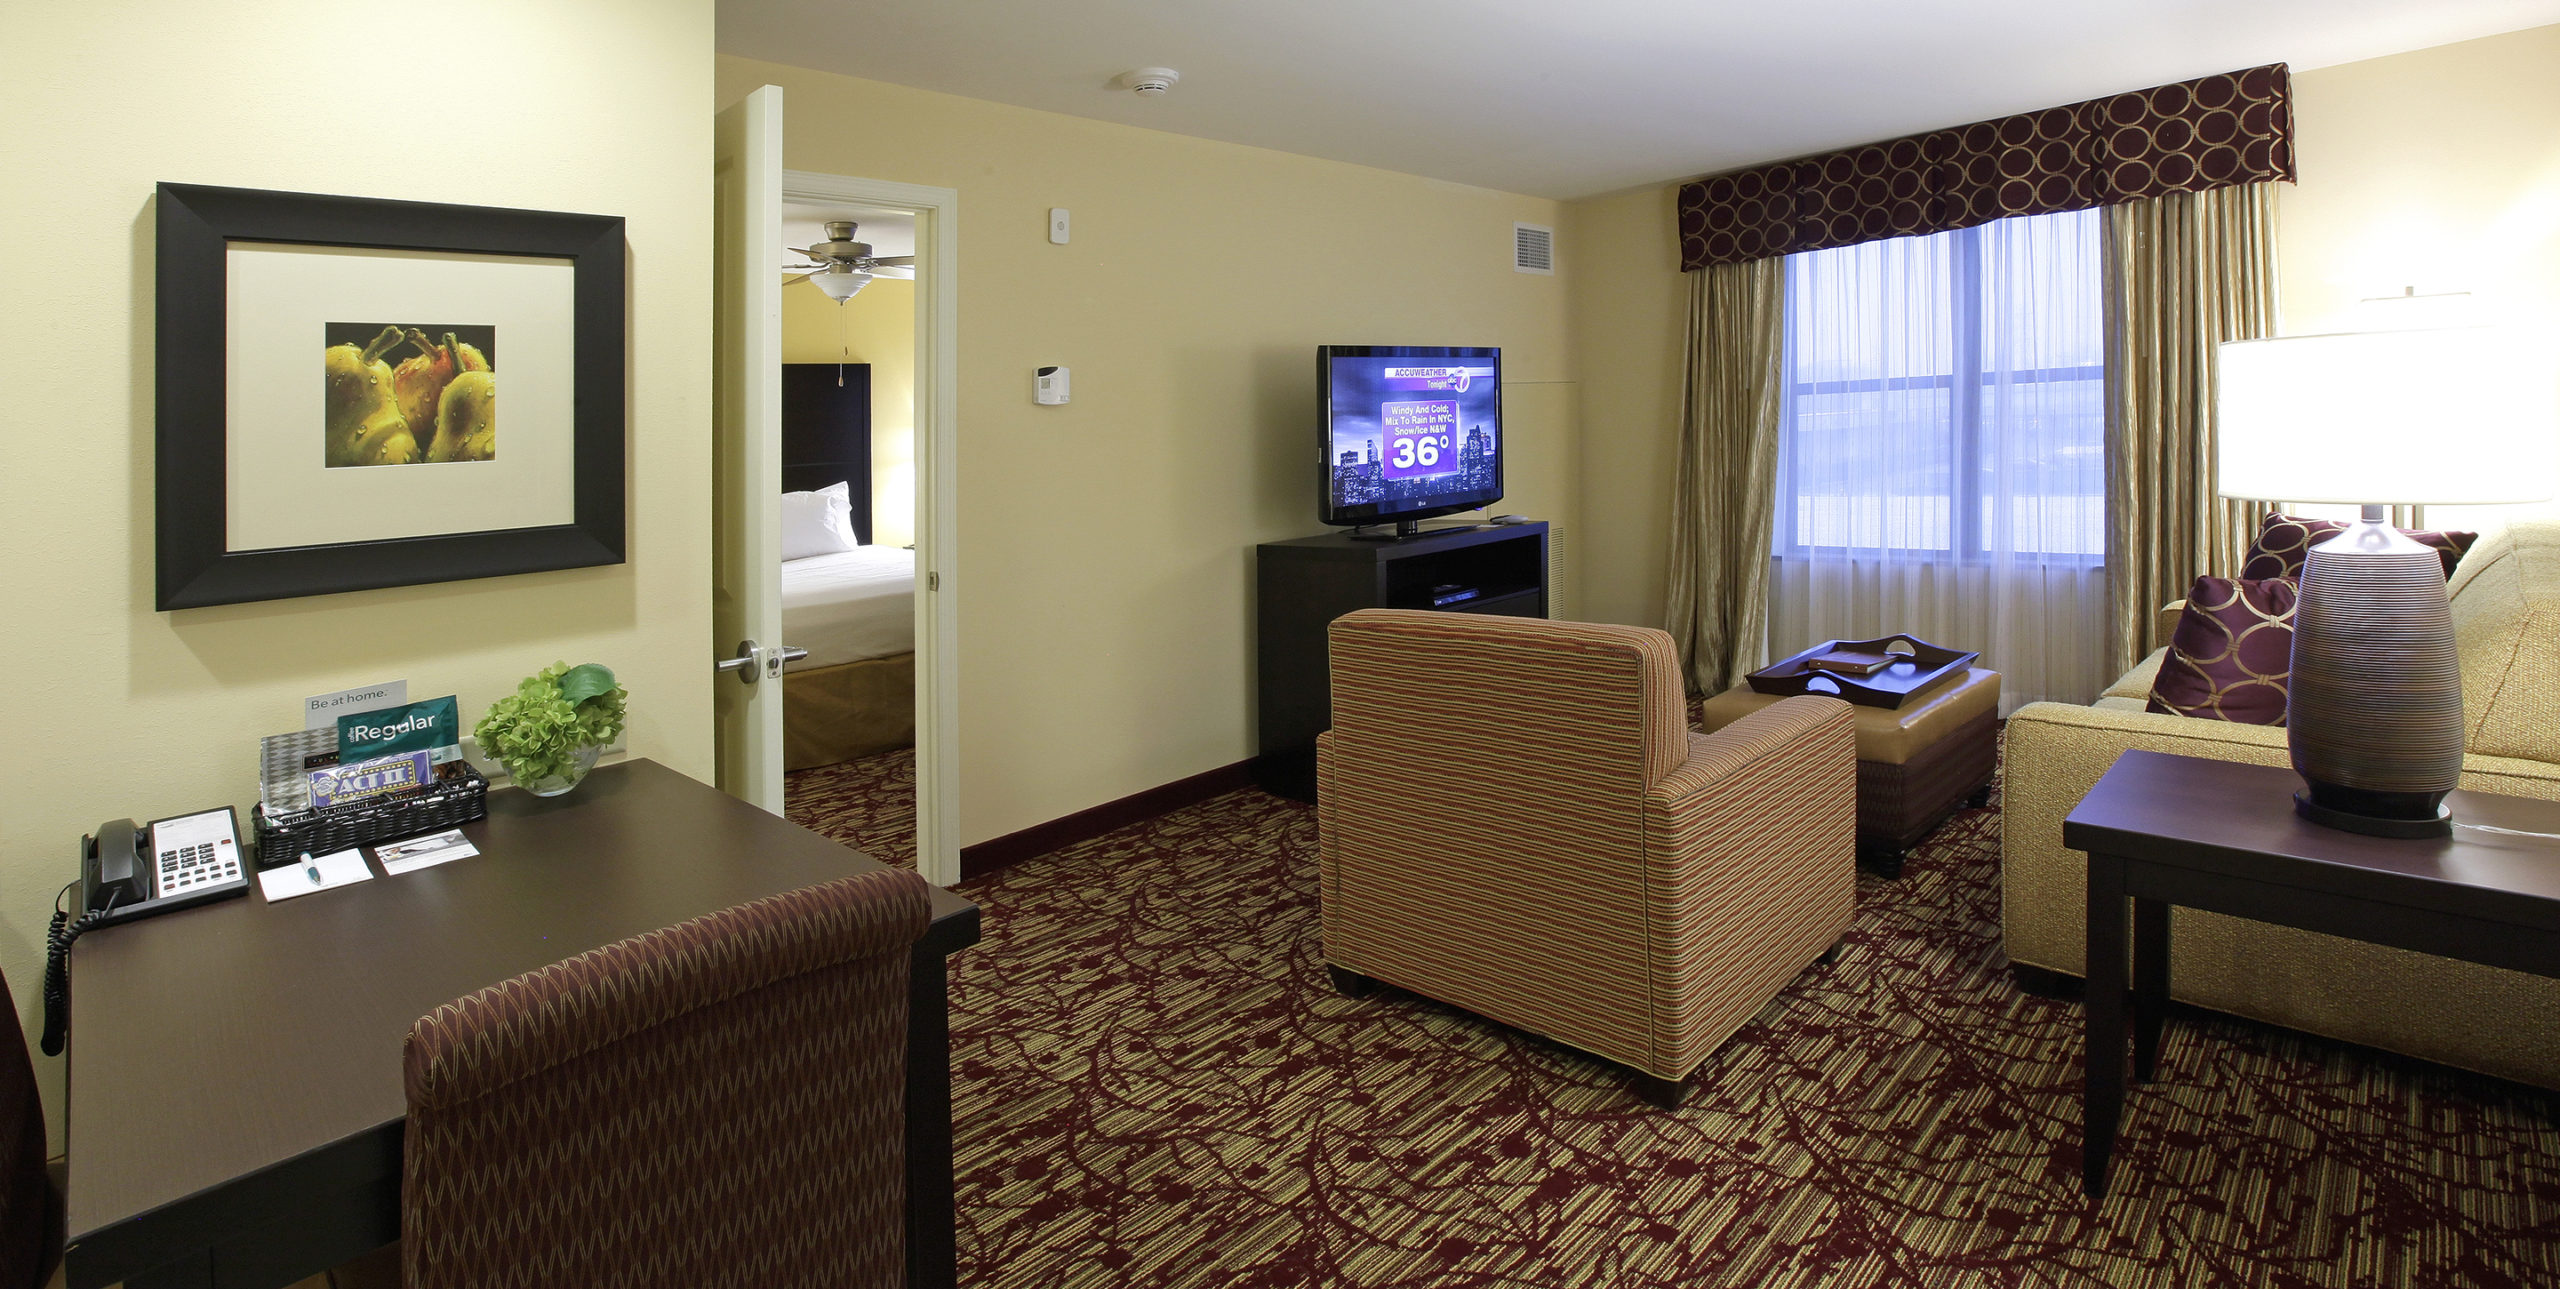 Living room and bedroom area of Homewood Suites at Carle Place